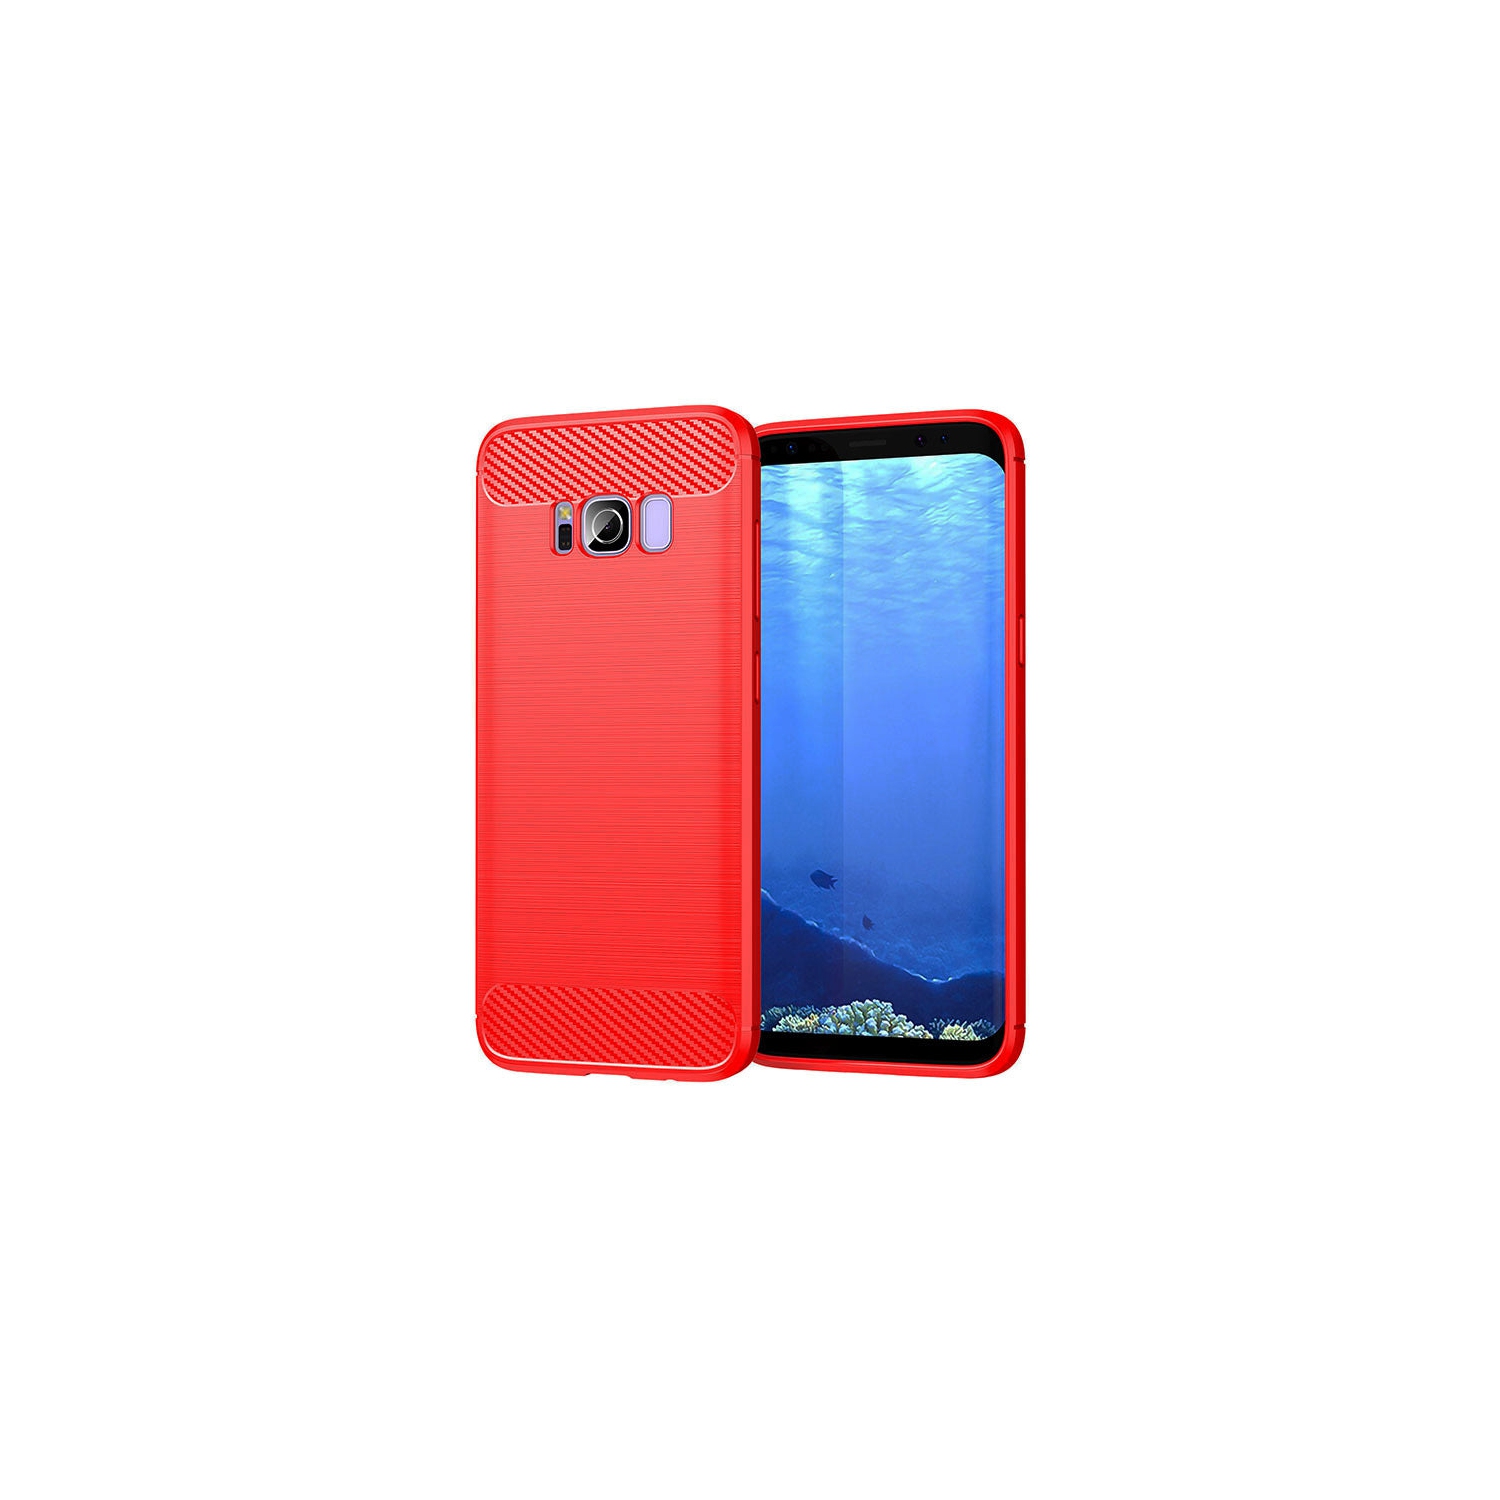 PANDACO Red Brushed Metal Case for Samsung Galaxy S8+